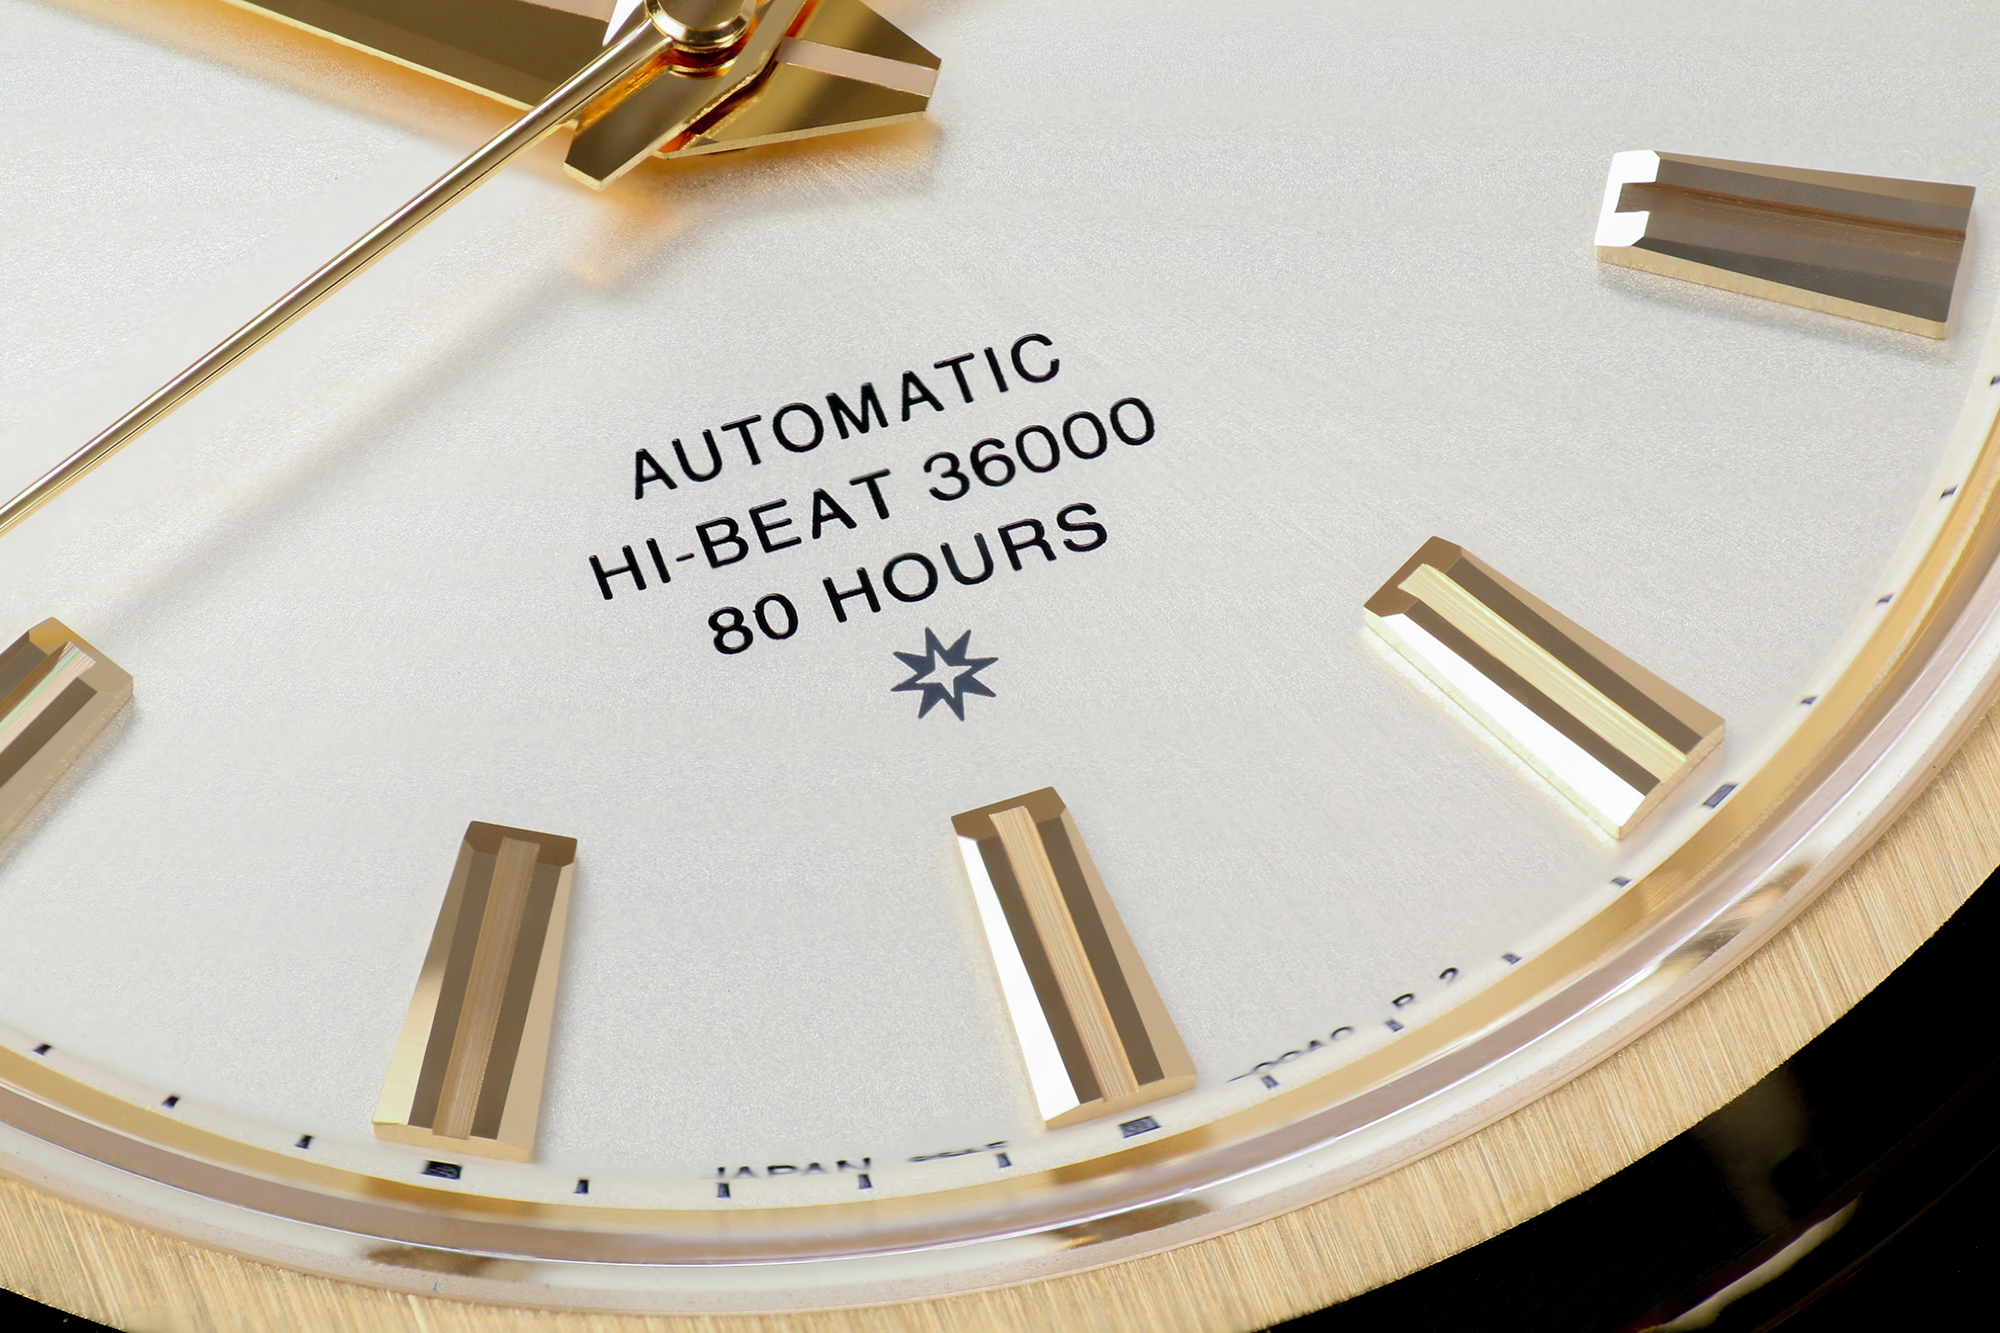 Grand Seiko SLGH002 with a gold case and light dial macro detail.